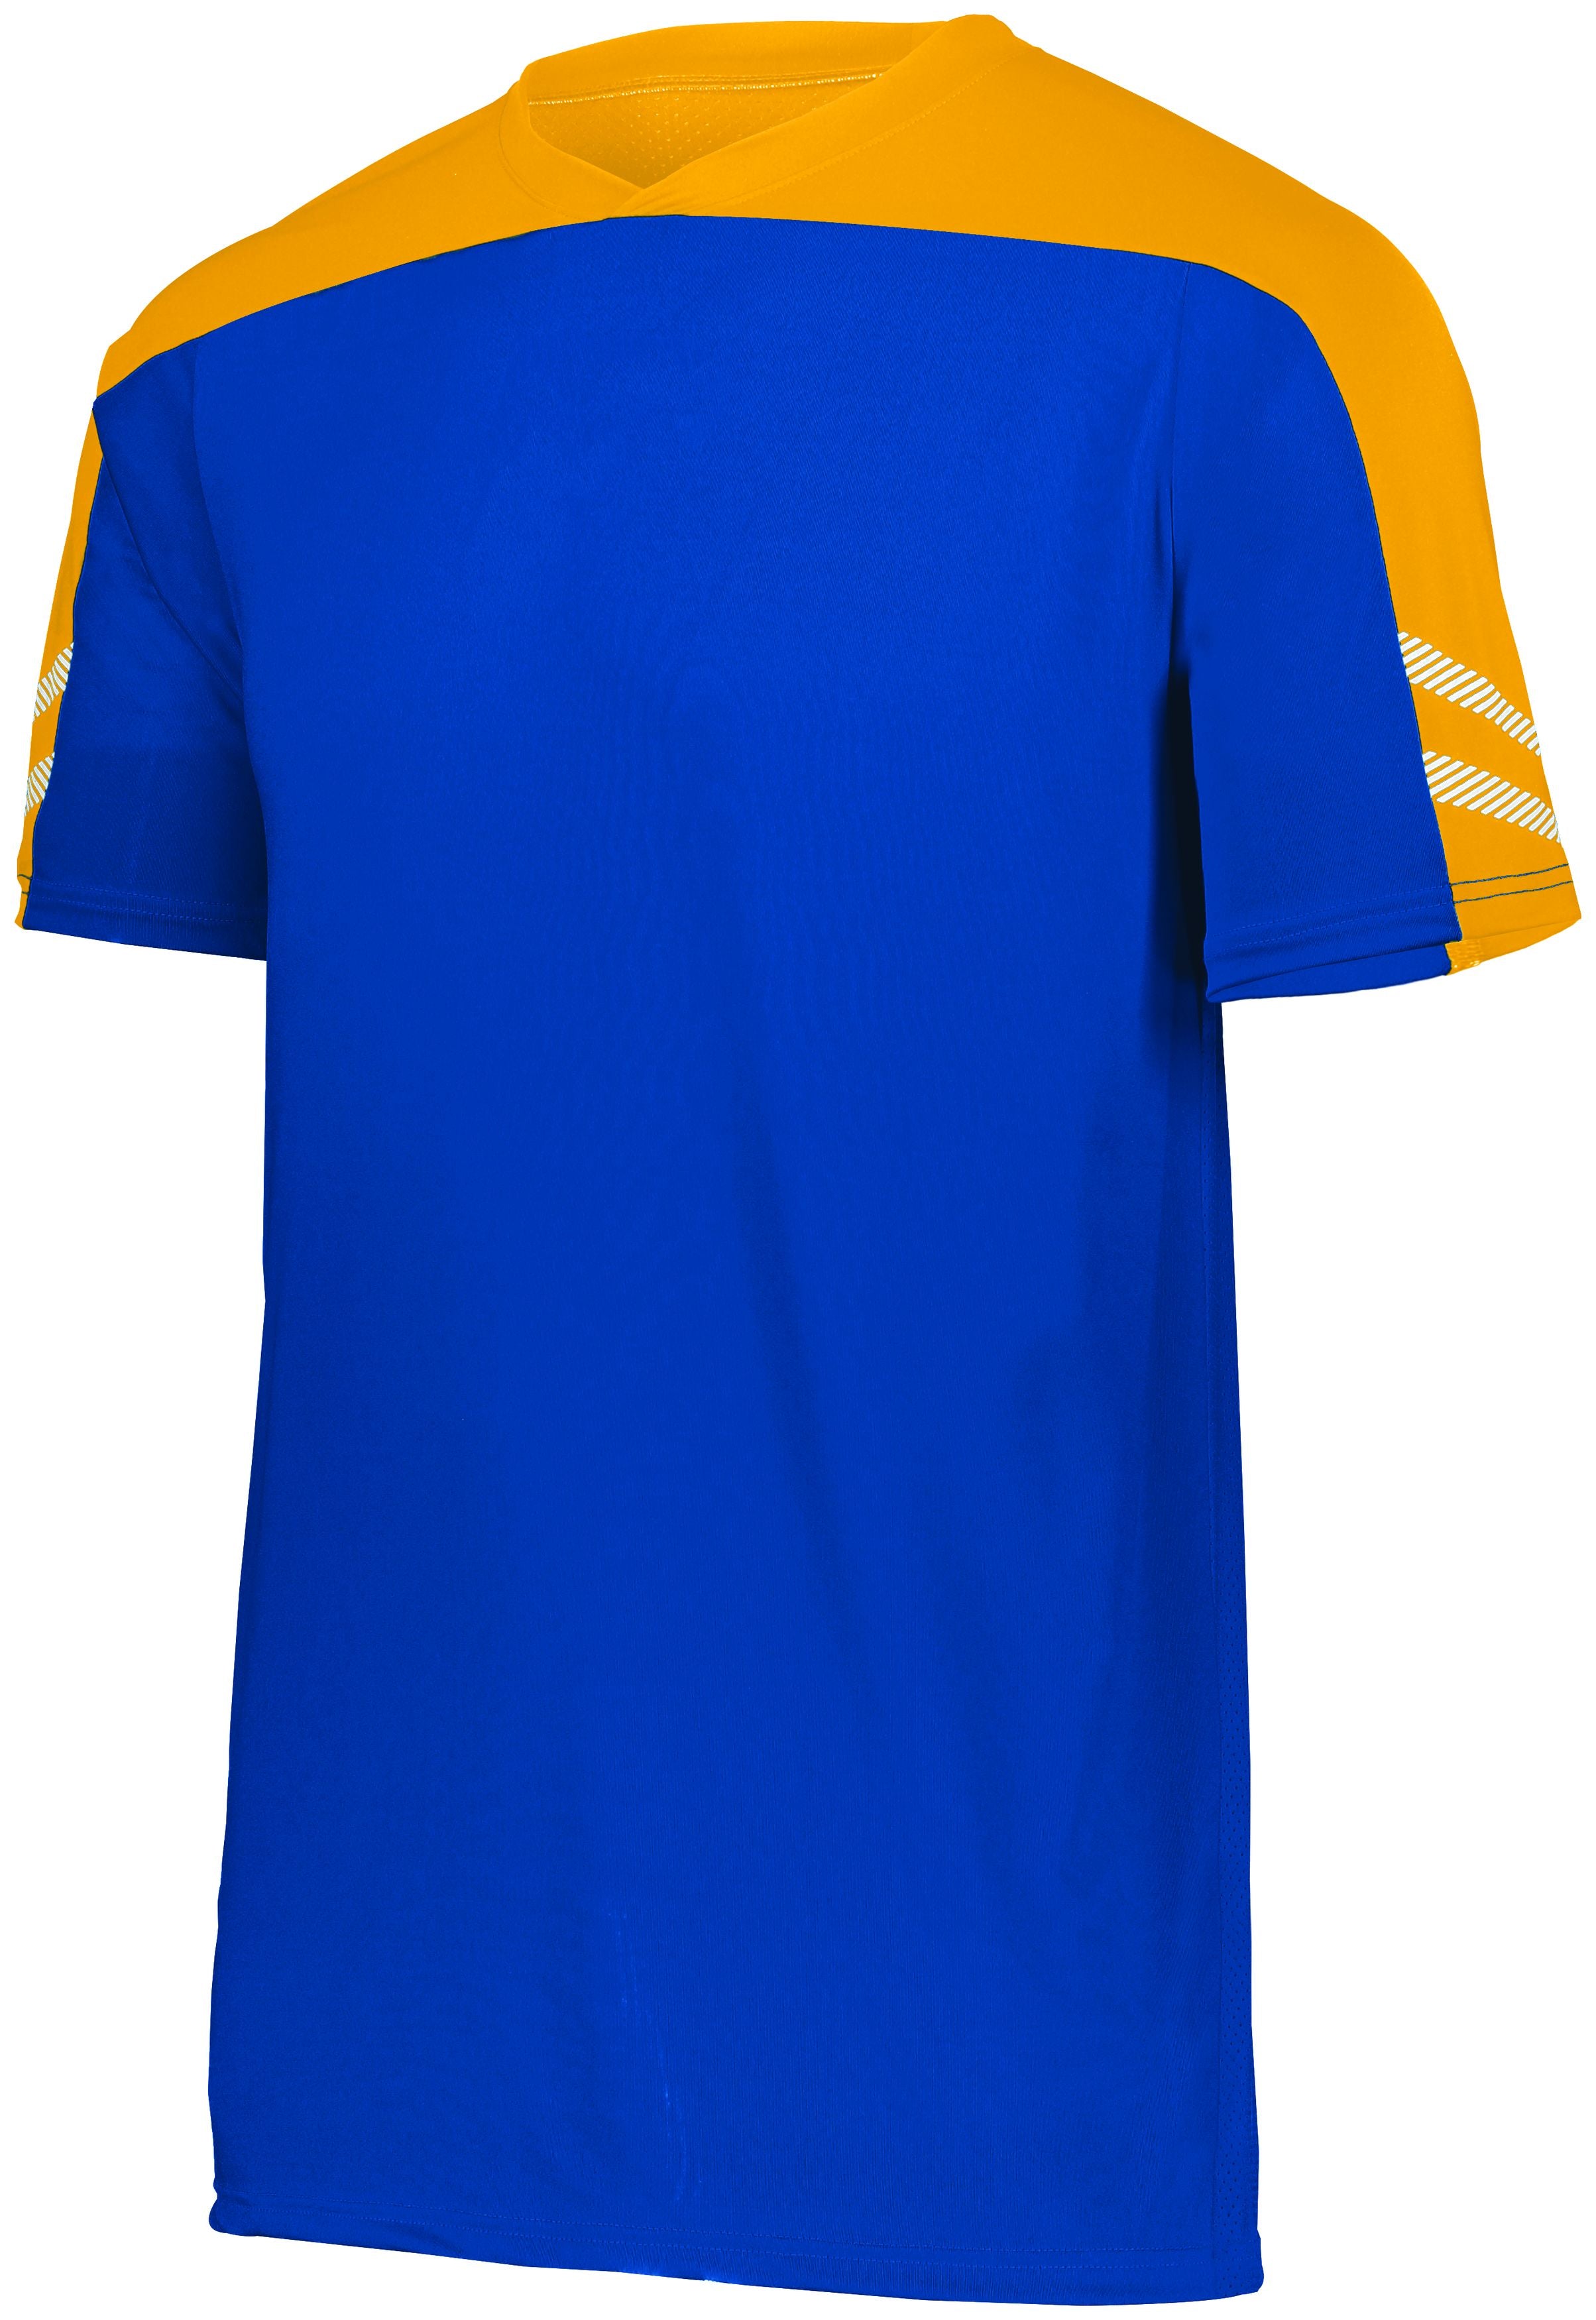 High 5 Youth Anfield Soccer Jersey in Royal/Athletic Gold/White  -Part of the Youth, Youth-Jersey, High5-Products, Soccer, Shirts, All-Sports-1 product lines at KanaleyCreations.com